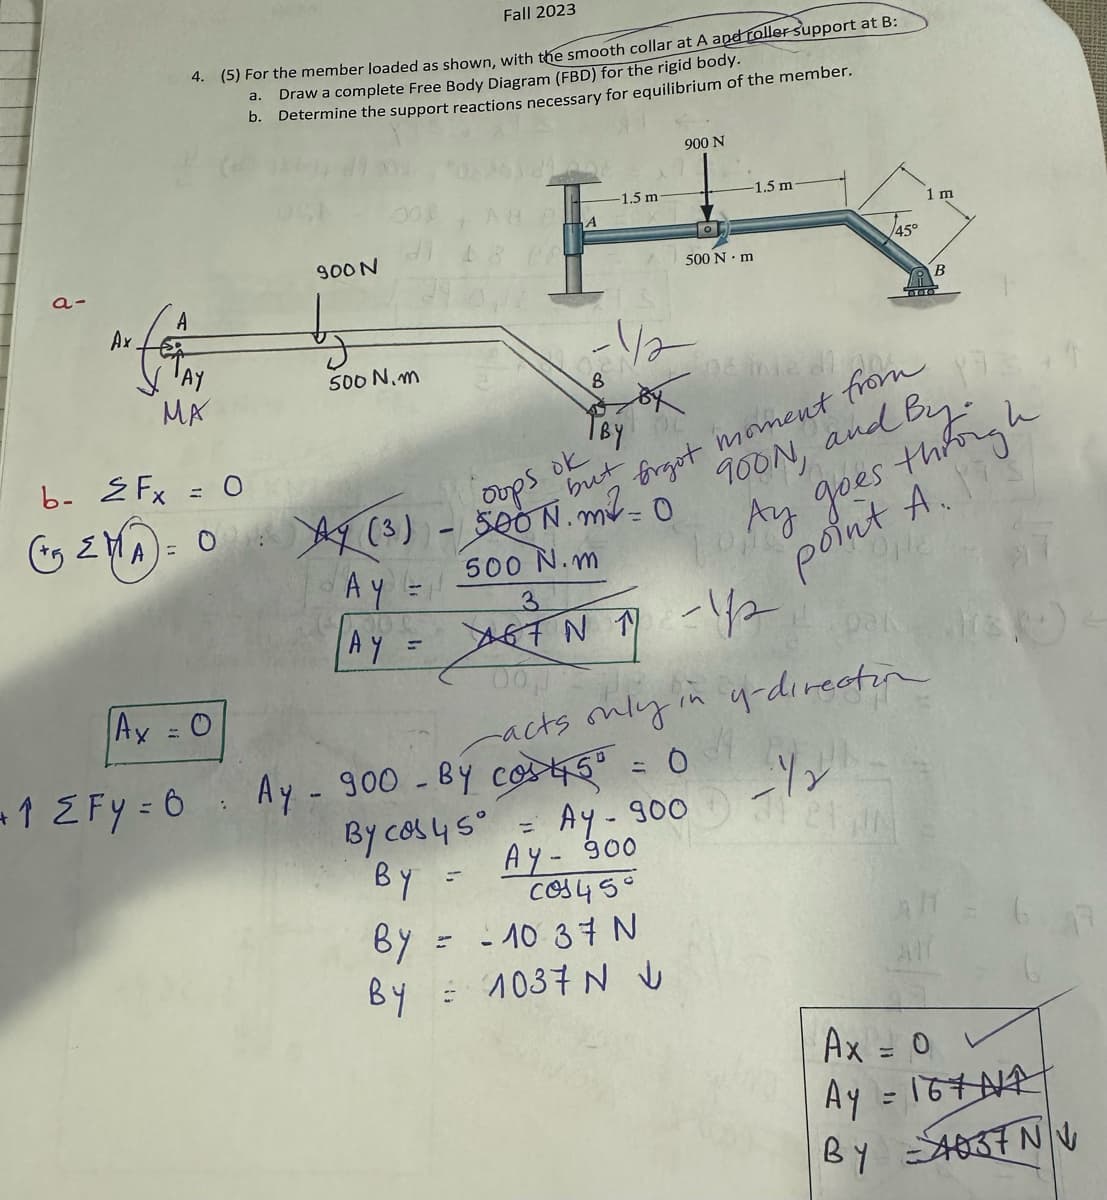 a-
A
fo
Ax.
Fall 2023
4. (5) For the member loaded as shown, with the smooth collar at A and roller support at B:
Draw a complete Free Body Diagram (FBD) for the rigid body.
b. Determine the support reactions necessary for equilibrium of the member.
a.
12Fy-
ма
Ax = 0
=
b- 2 Fx = 0
(+5 ≤MA) = 0 Ay (3)
AY
900 N
:
500 N.m
=
A
=
1.5 m
-1/2
By
D
900 N
0
ok
oops
SOON. m² =
but
500 N.m
3
67N 17 -12
11
500 N·m
By
- 10:37 N
By = 1037 NU
-1.5 m
Ay - 900 - By cos 45º = 0
By cos 45º = Ay - 900
BY
Ay - 900
cos450
pë me di
brgot moment from
900N, and
TOM
l By-
h
Ay goes through
point A.
HE
45°
00,1
acts only in y-direction
- 12
pak
21 IN
1 m
B
ATT
sk
Ax = 0
Ay = 16+NA
By 4037 NV